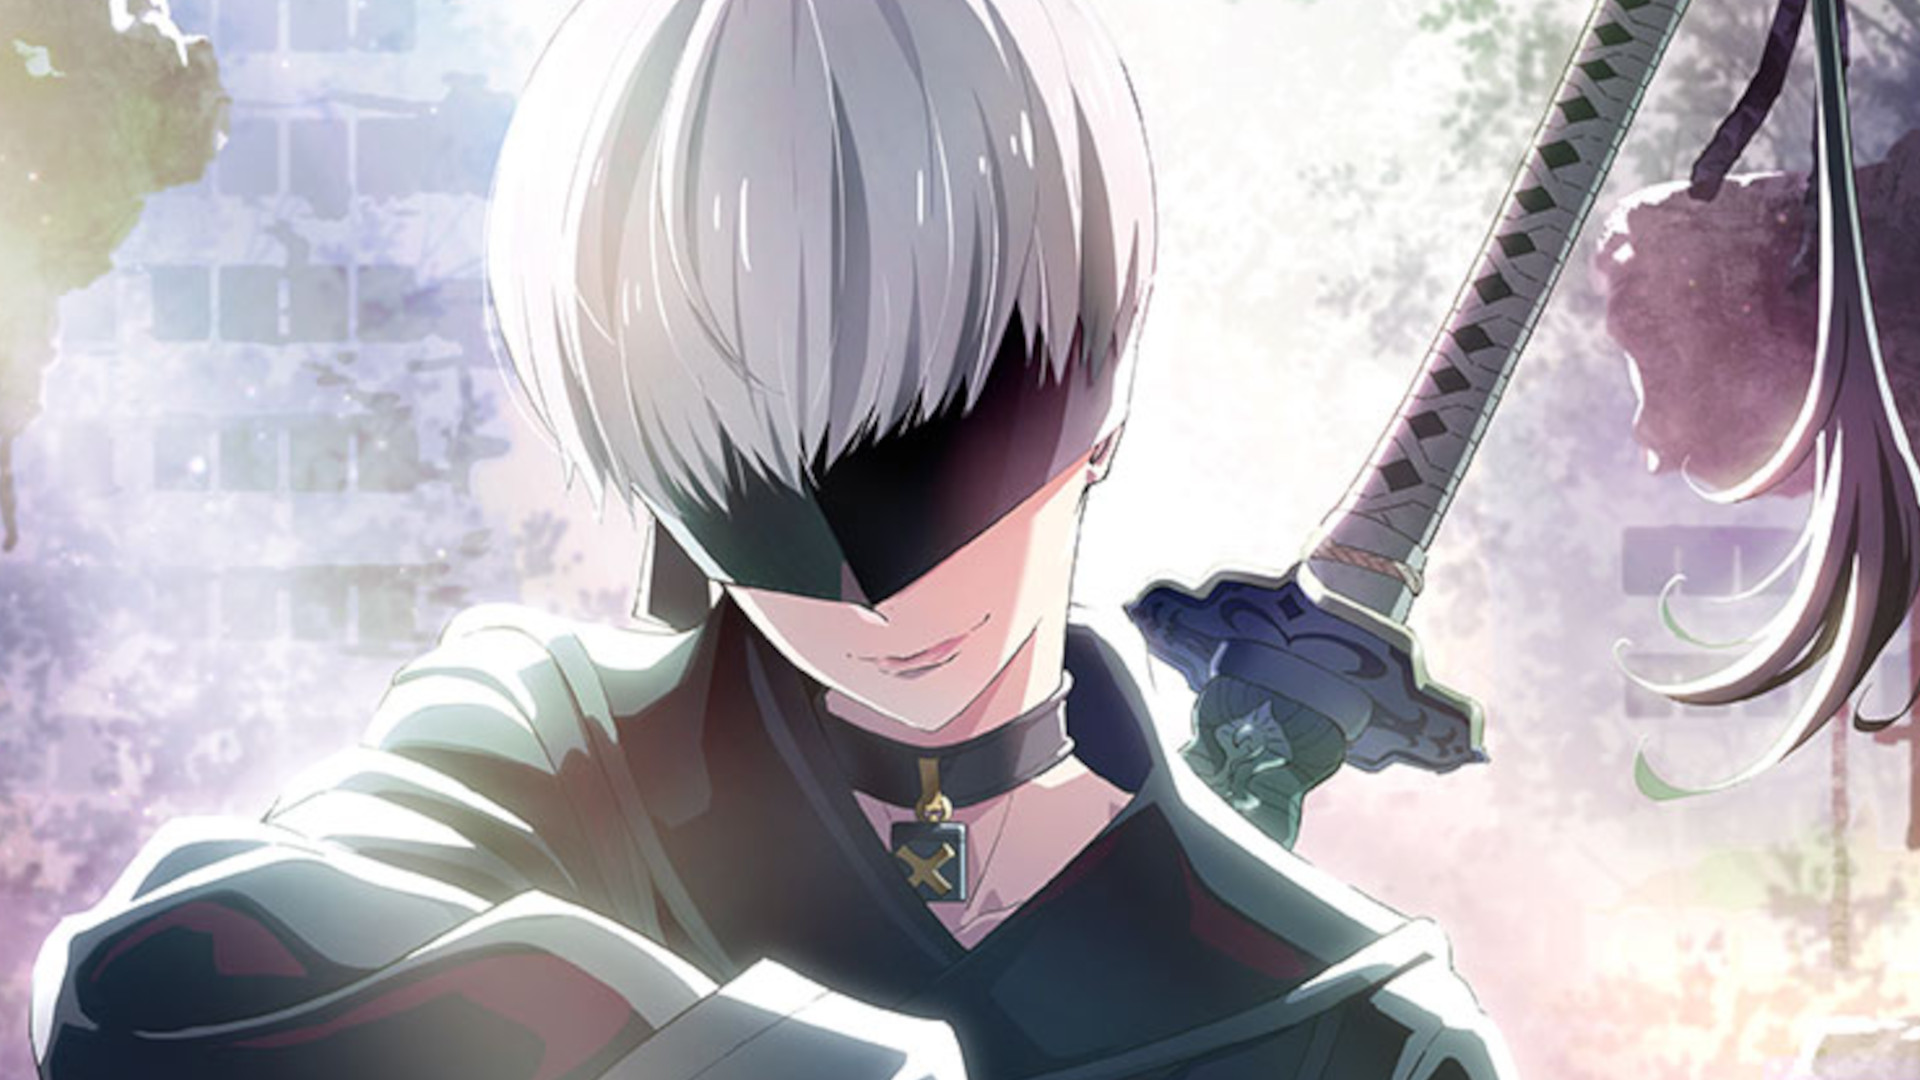 Nier Automata Ver 11a English Dub Episode 1 Release Date and Time   GameRevolution